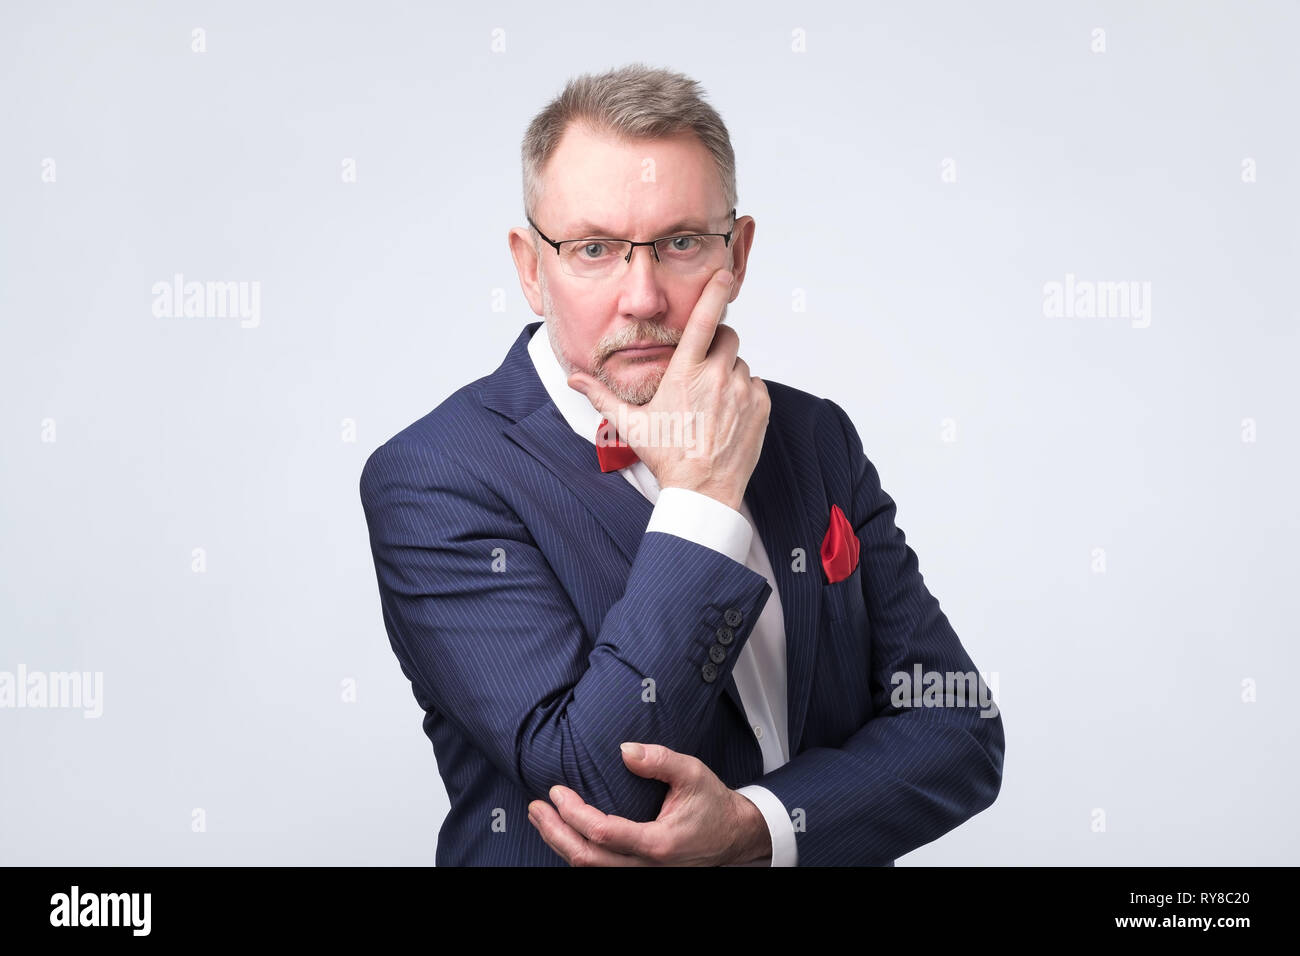 Senior european man in blue suit and glasses looking at camera Stock Photo